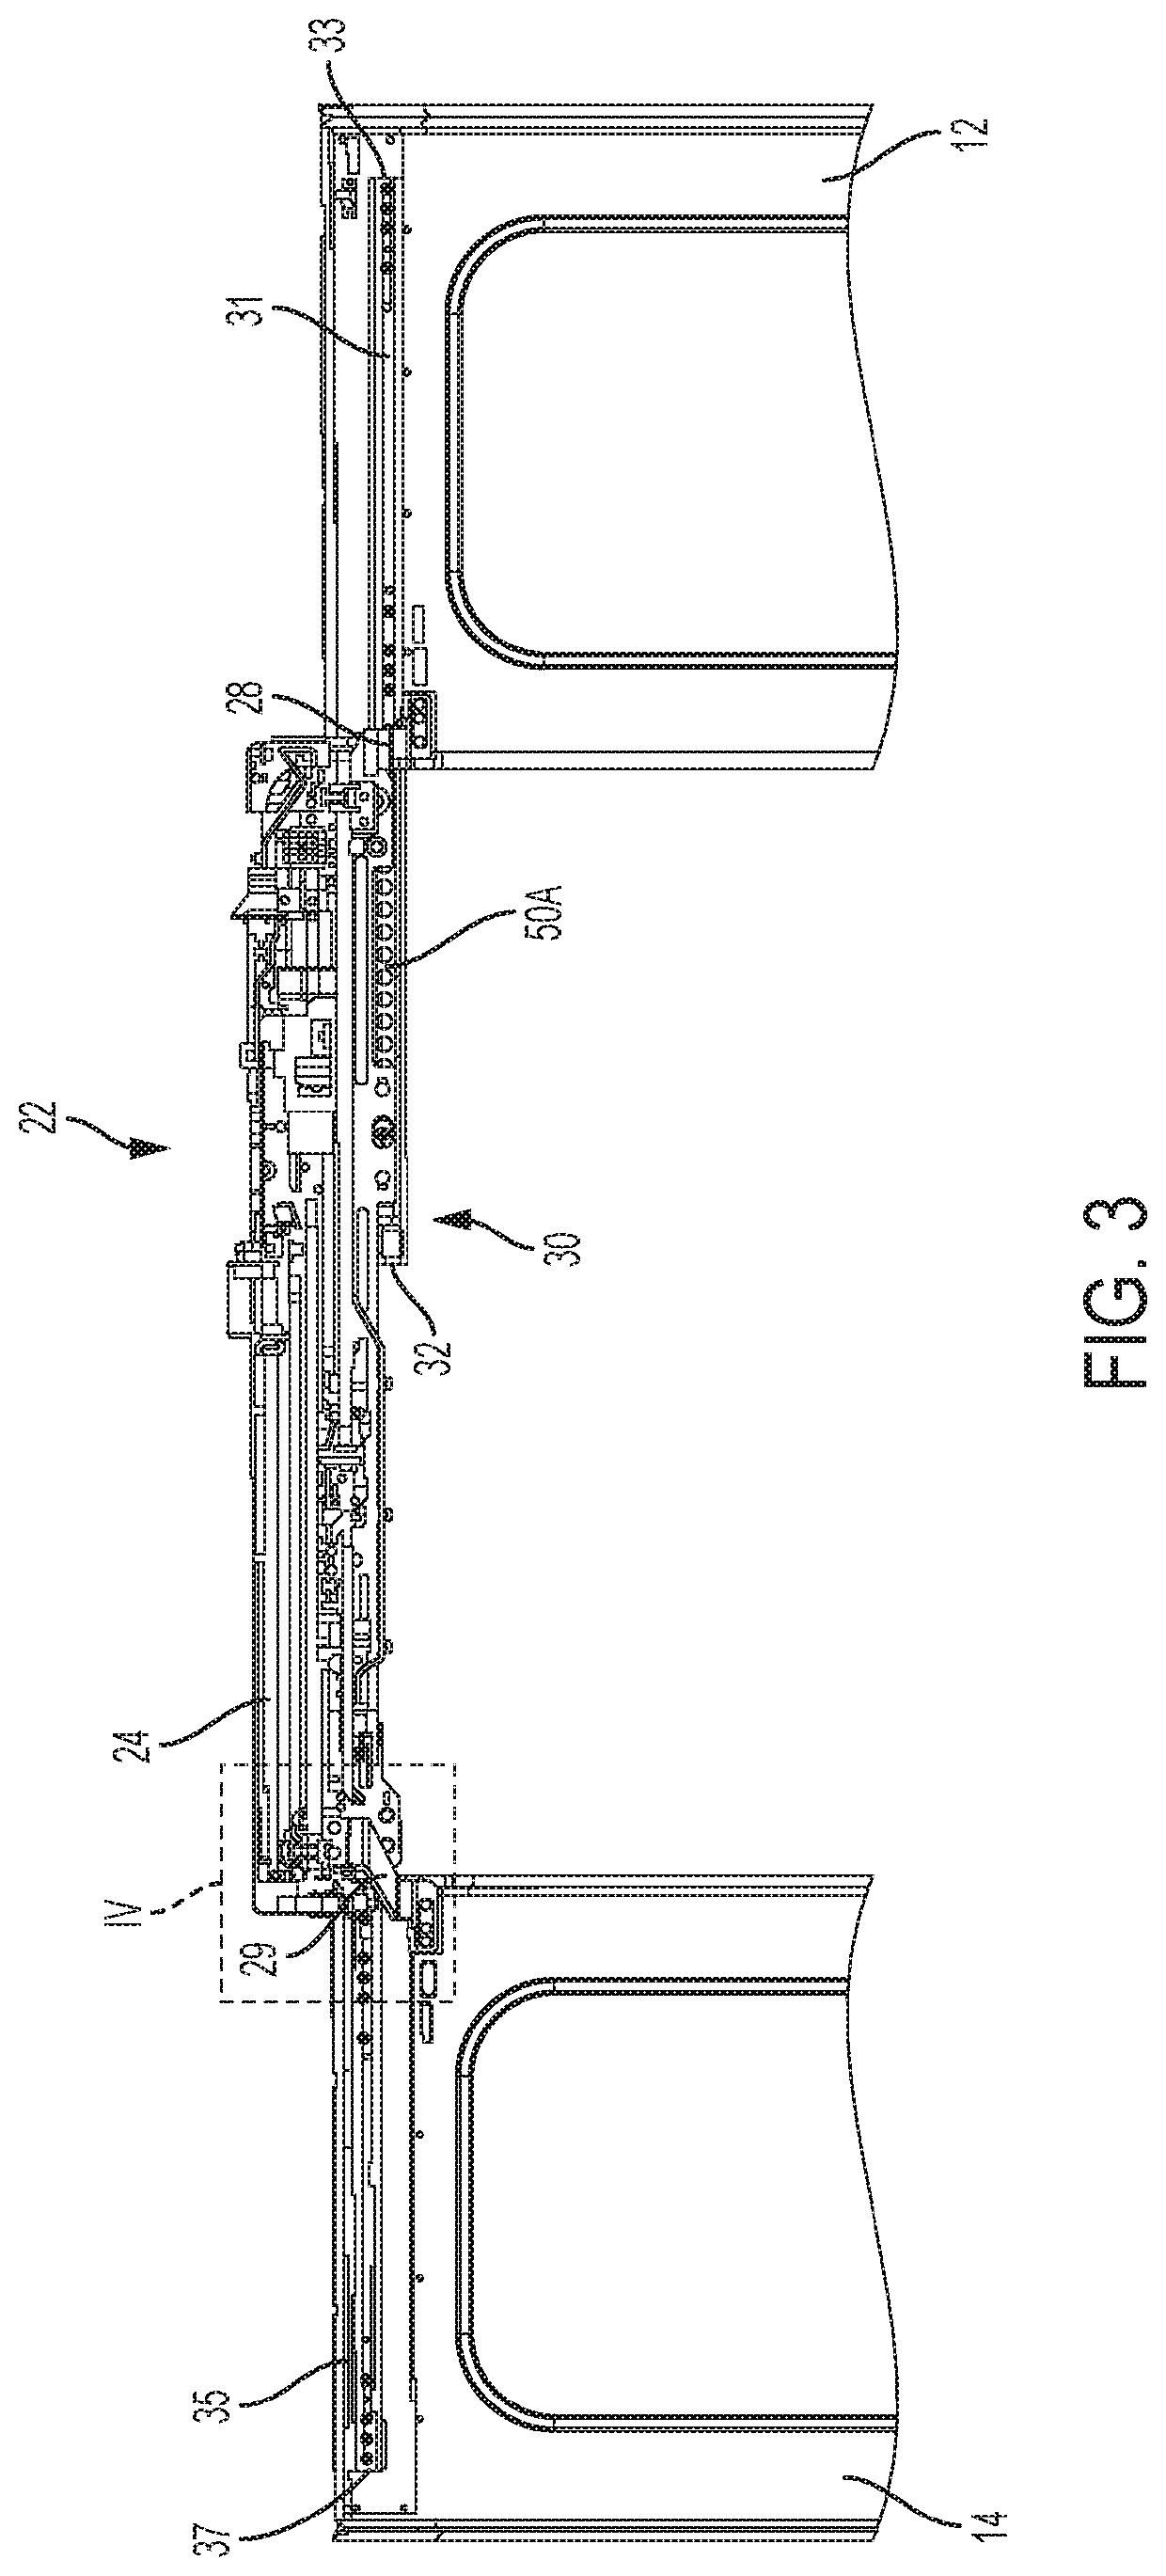 Secondary retention device for bi-parting doors